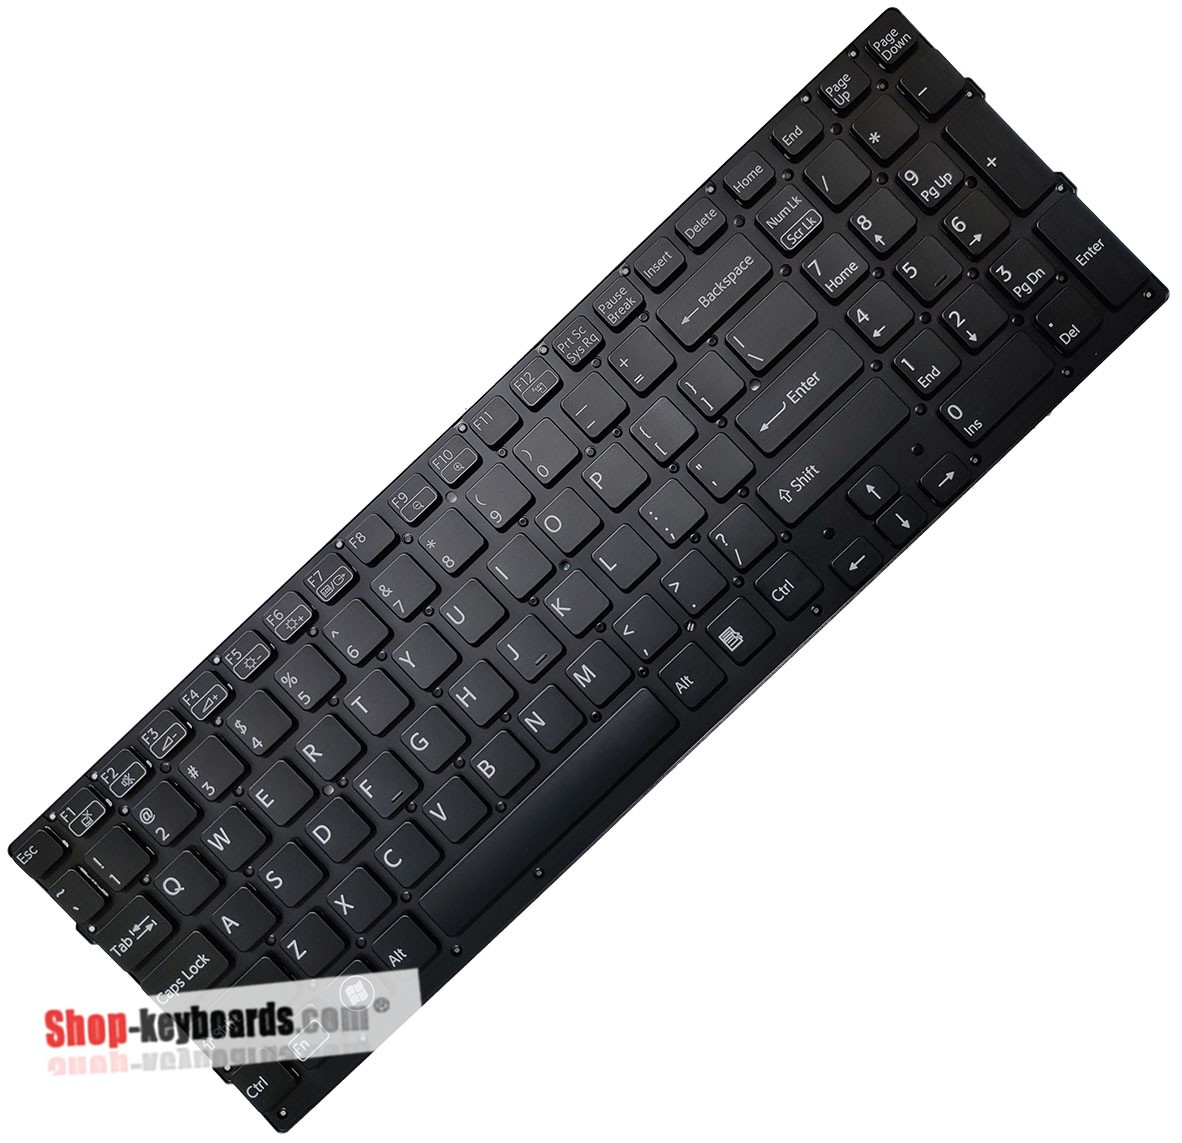 Sony 55010S232U0-035-G Keyboard replacement